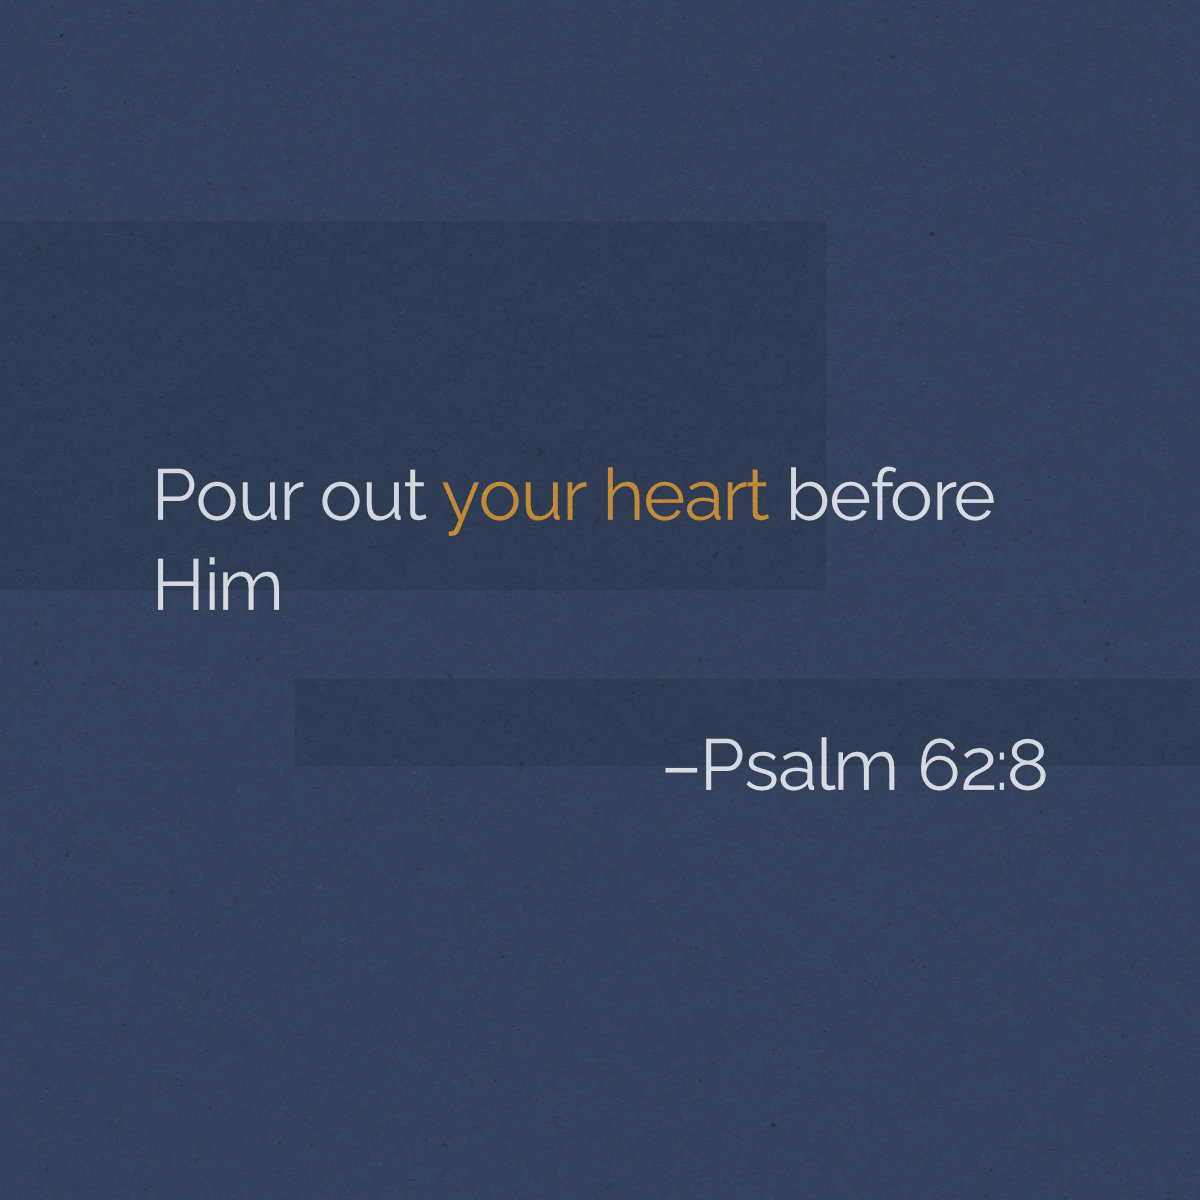 Pour out your heart